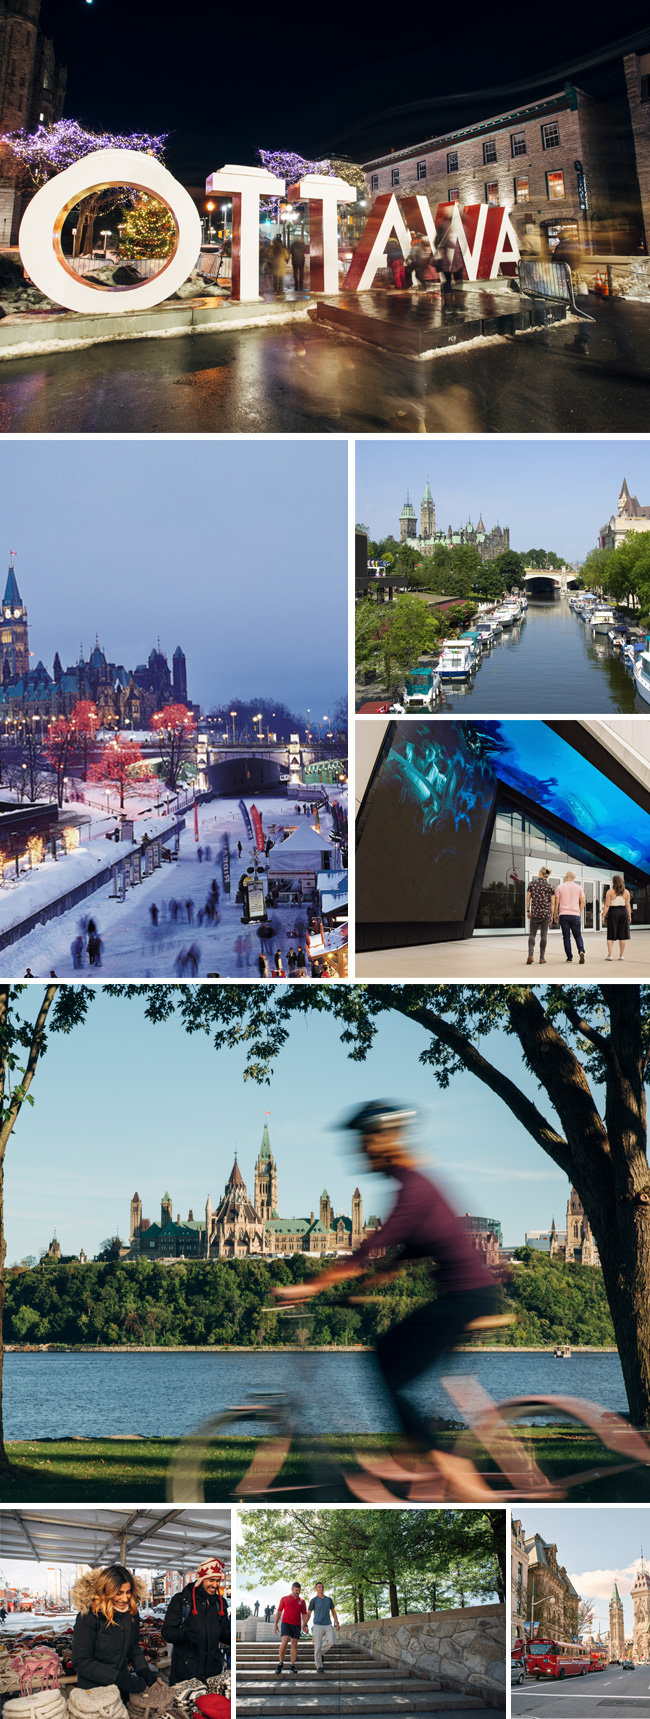 Assembly of various tourist scenes in Ottawa